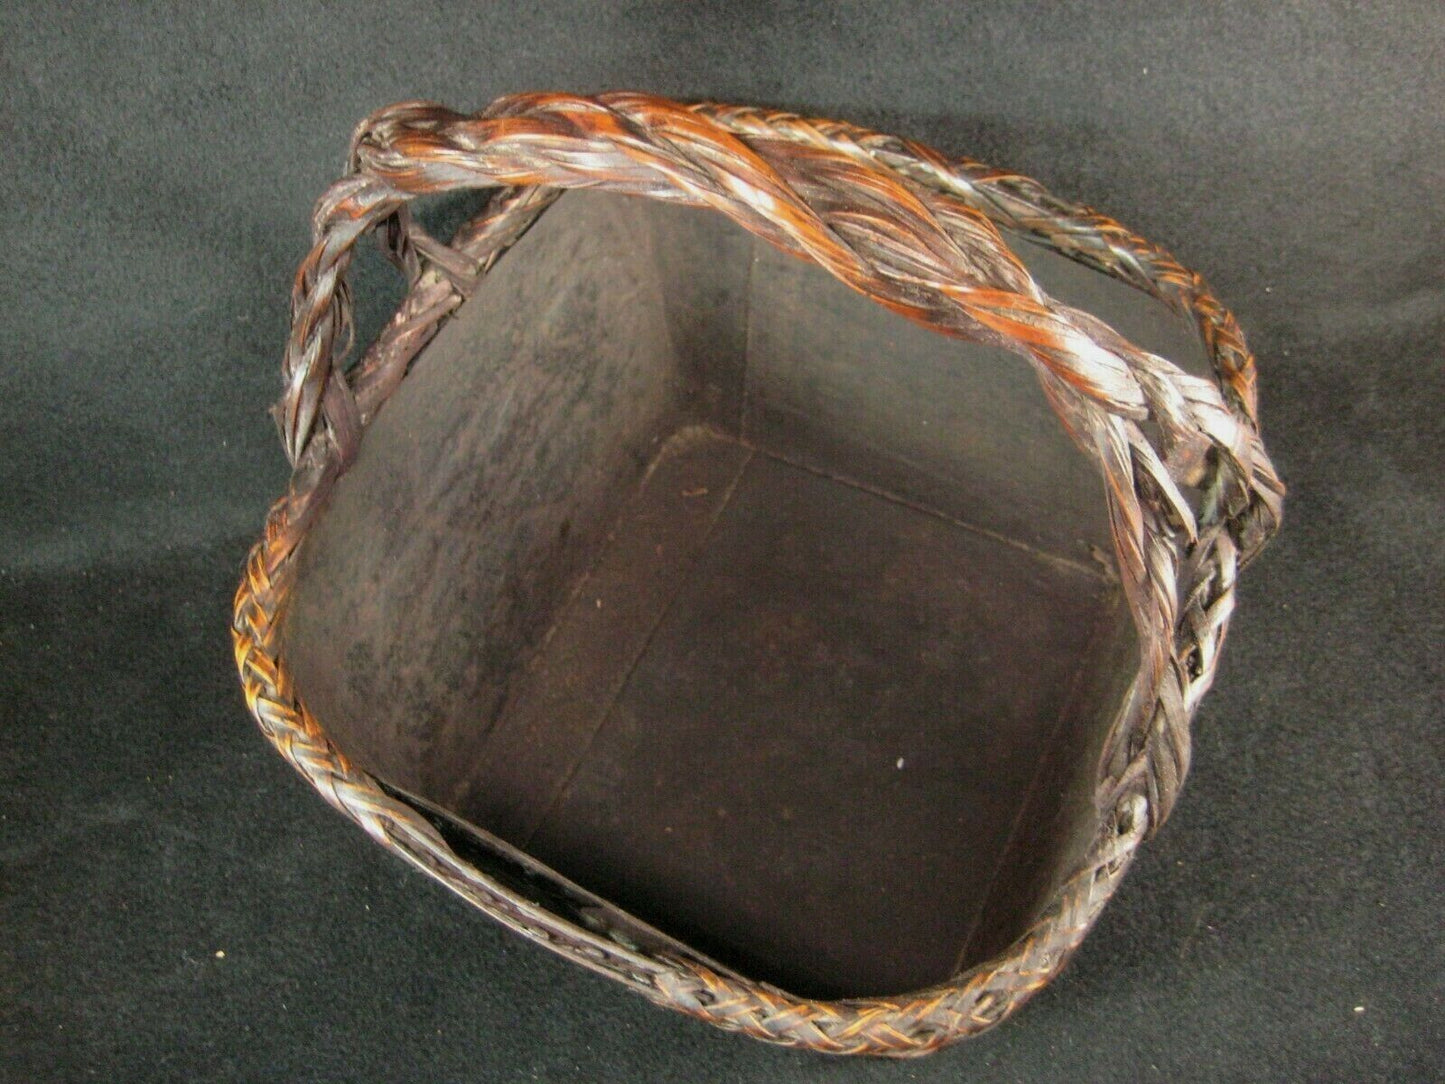 Antique Japanese (C. 1920) Tin Lined Bamboo Basket Charcoal Caddy Tea Ceremony